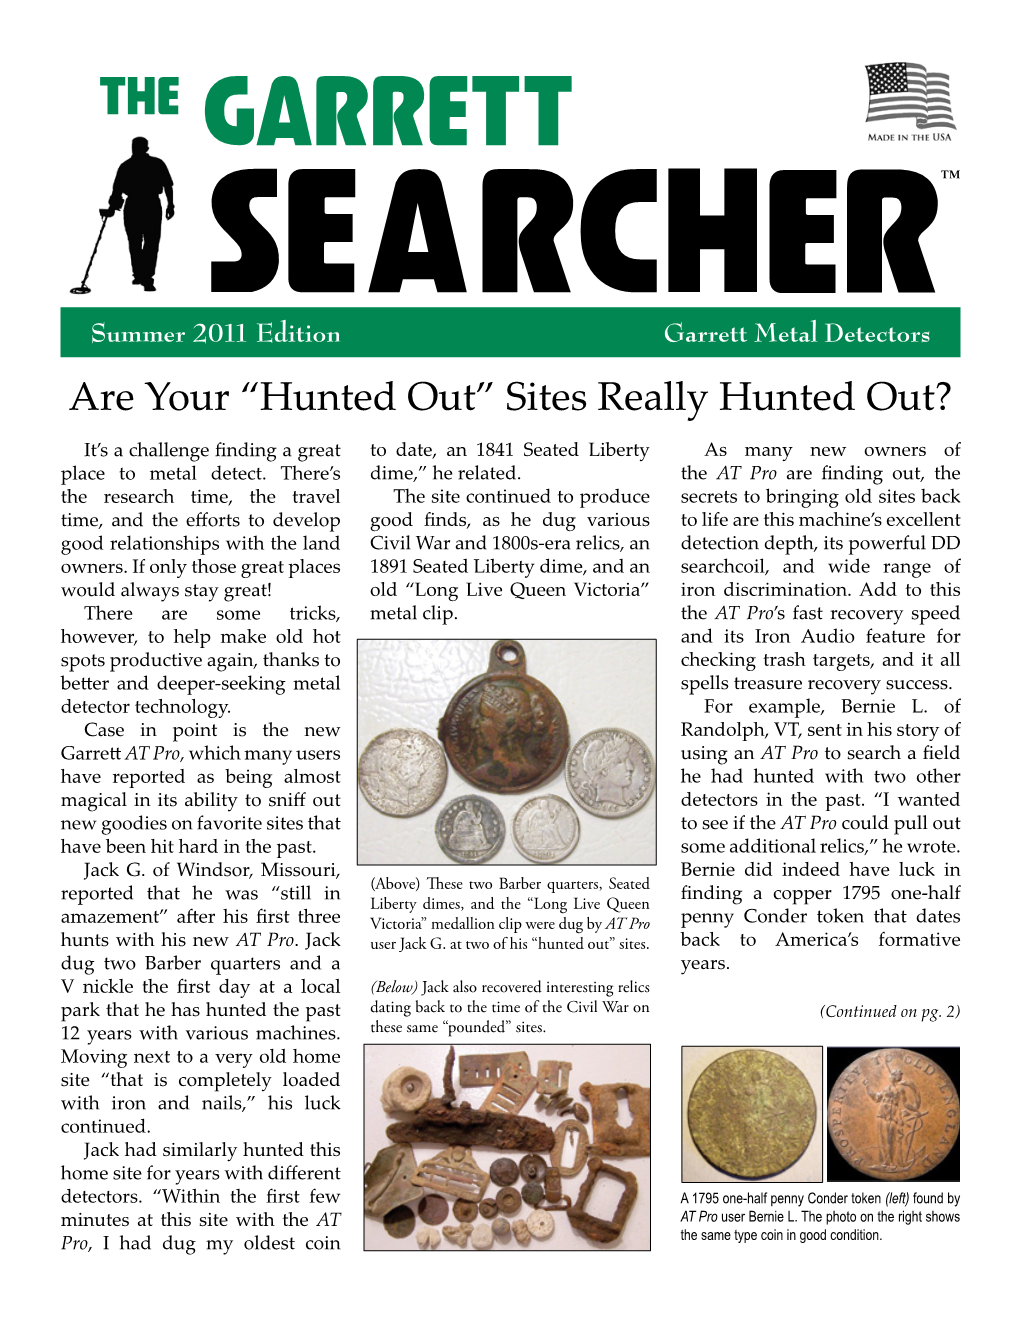 Summer 2011 Edition Garrett Metal Detectors Are Your “Hunted Out” Sites Really Hunted Out?